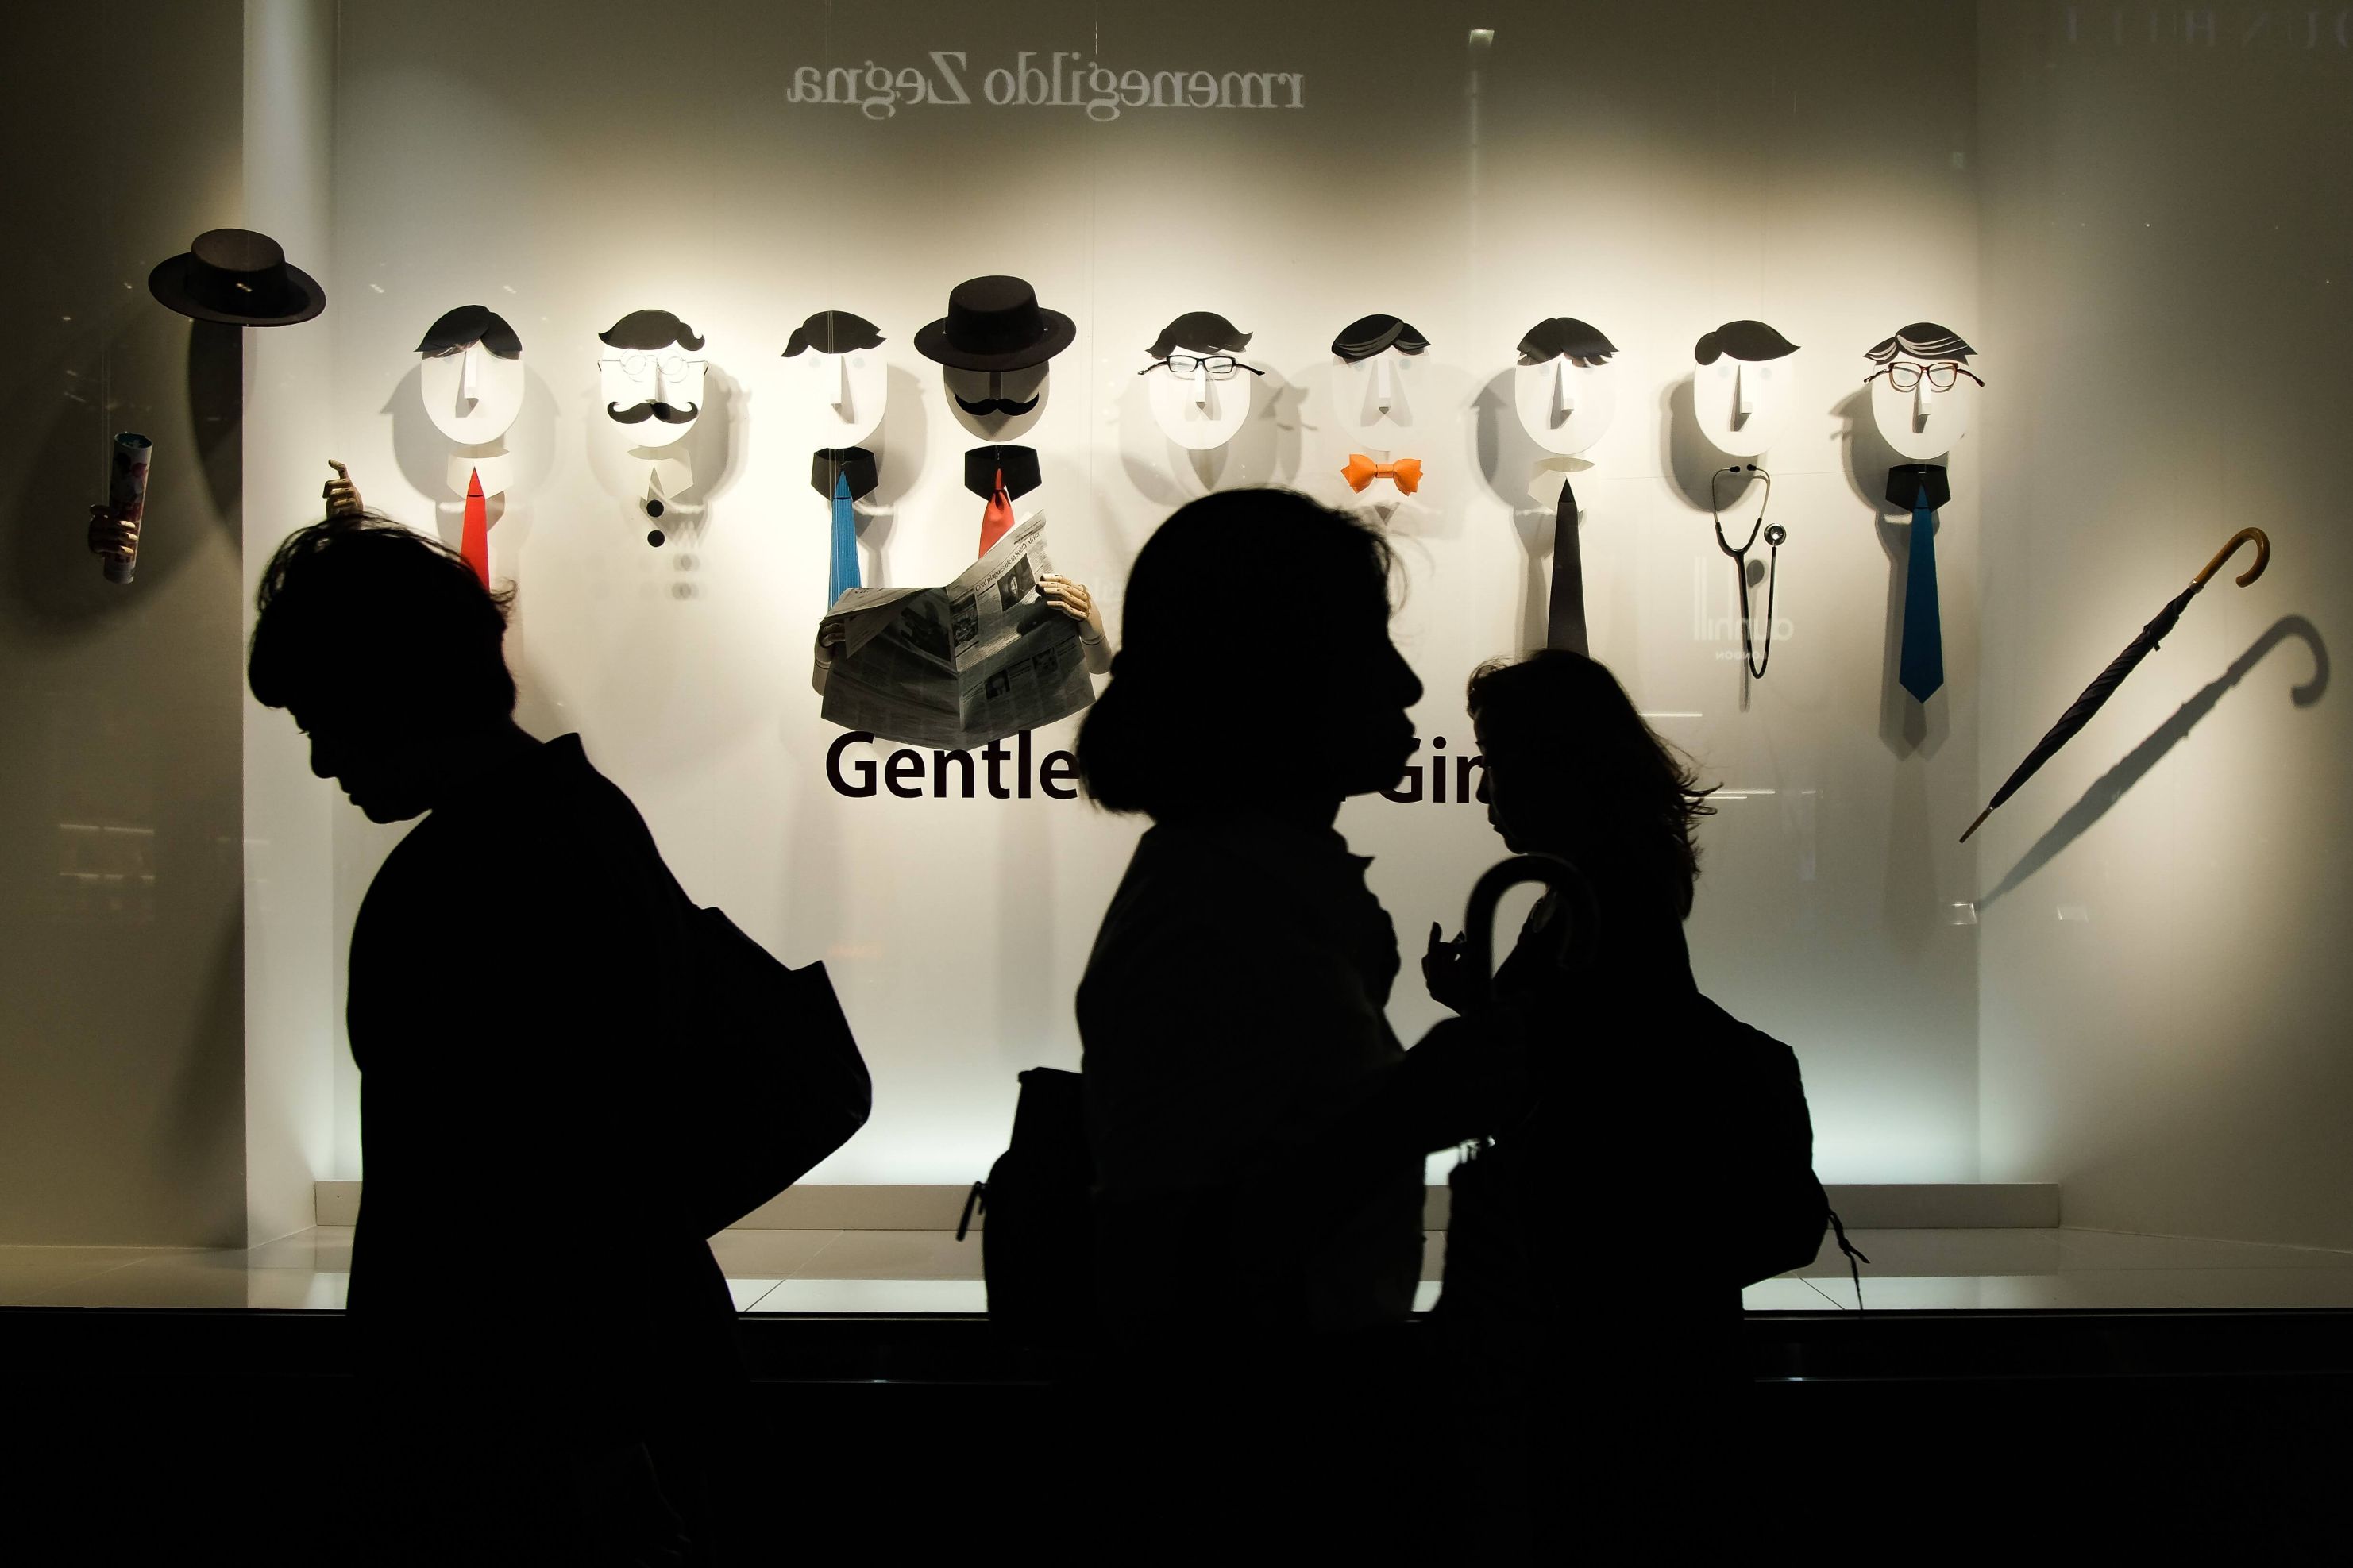 The faces in the display are not just playful, but look extremely good set against a stark contrast of dark silhouettes in the foreground. A most see shop in the Ginza area.